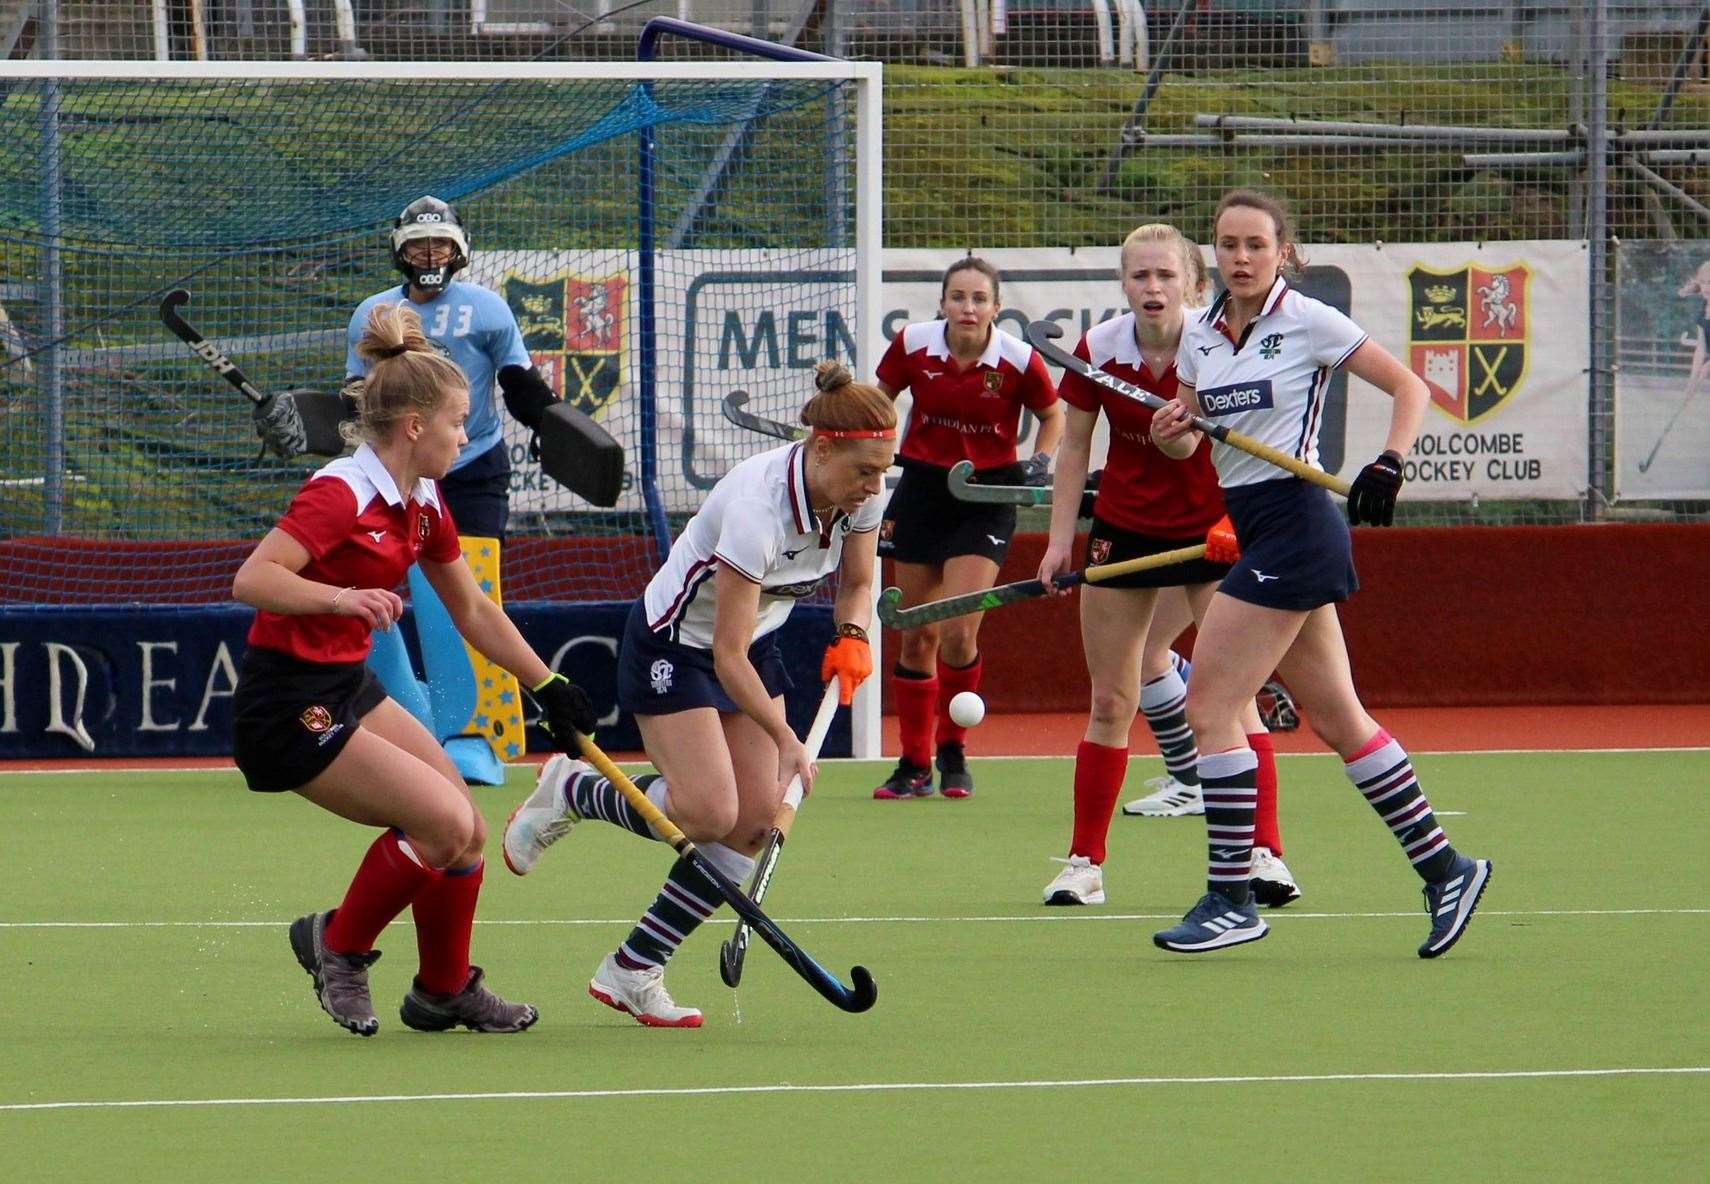 Holcombe’s women’s team are at home on Saturday ahead of the men’s Premier Division fixture against against Surbiton Picture: Jon Goodall